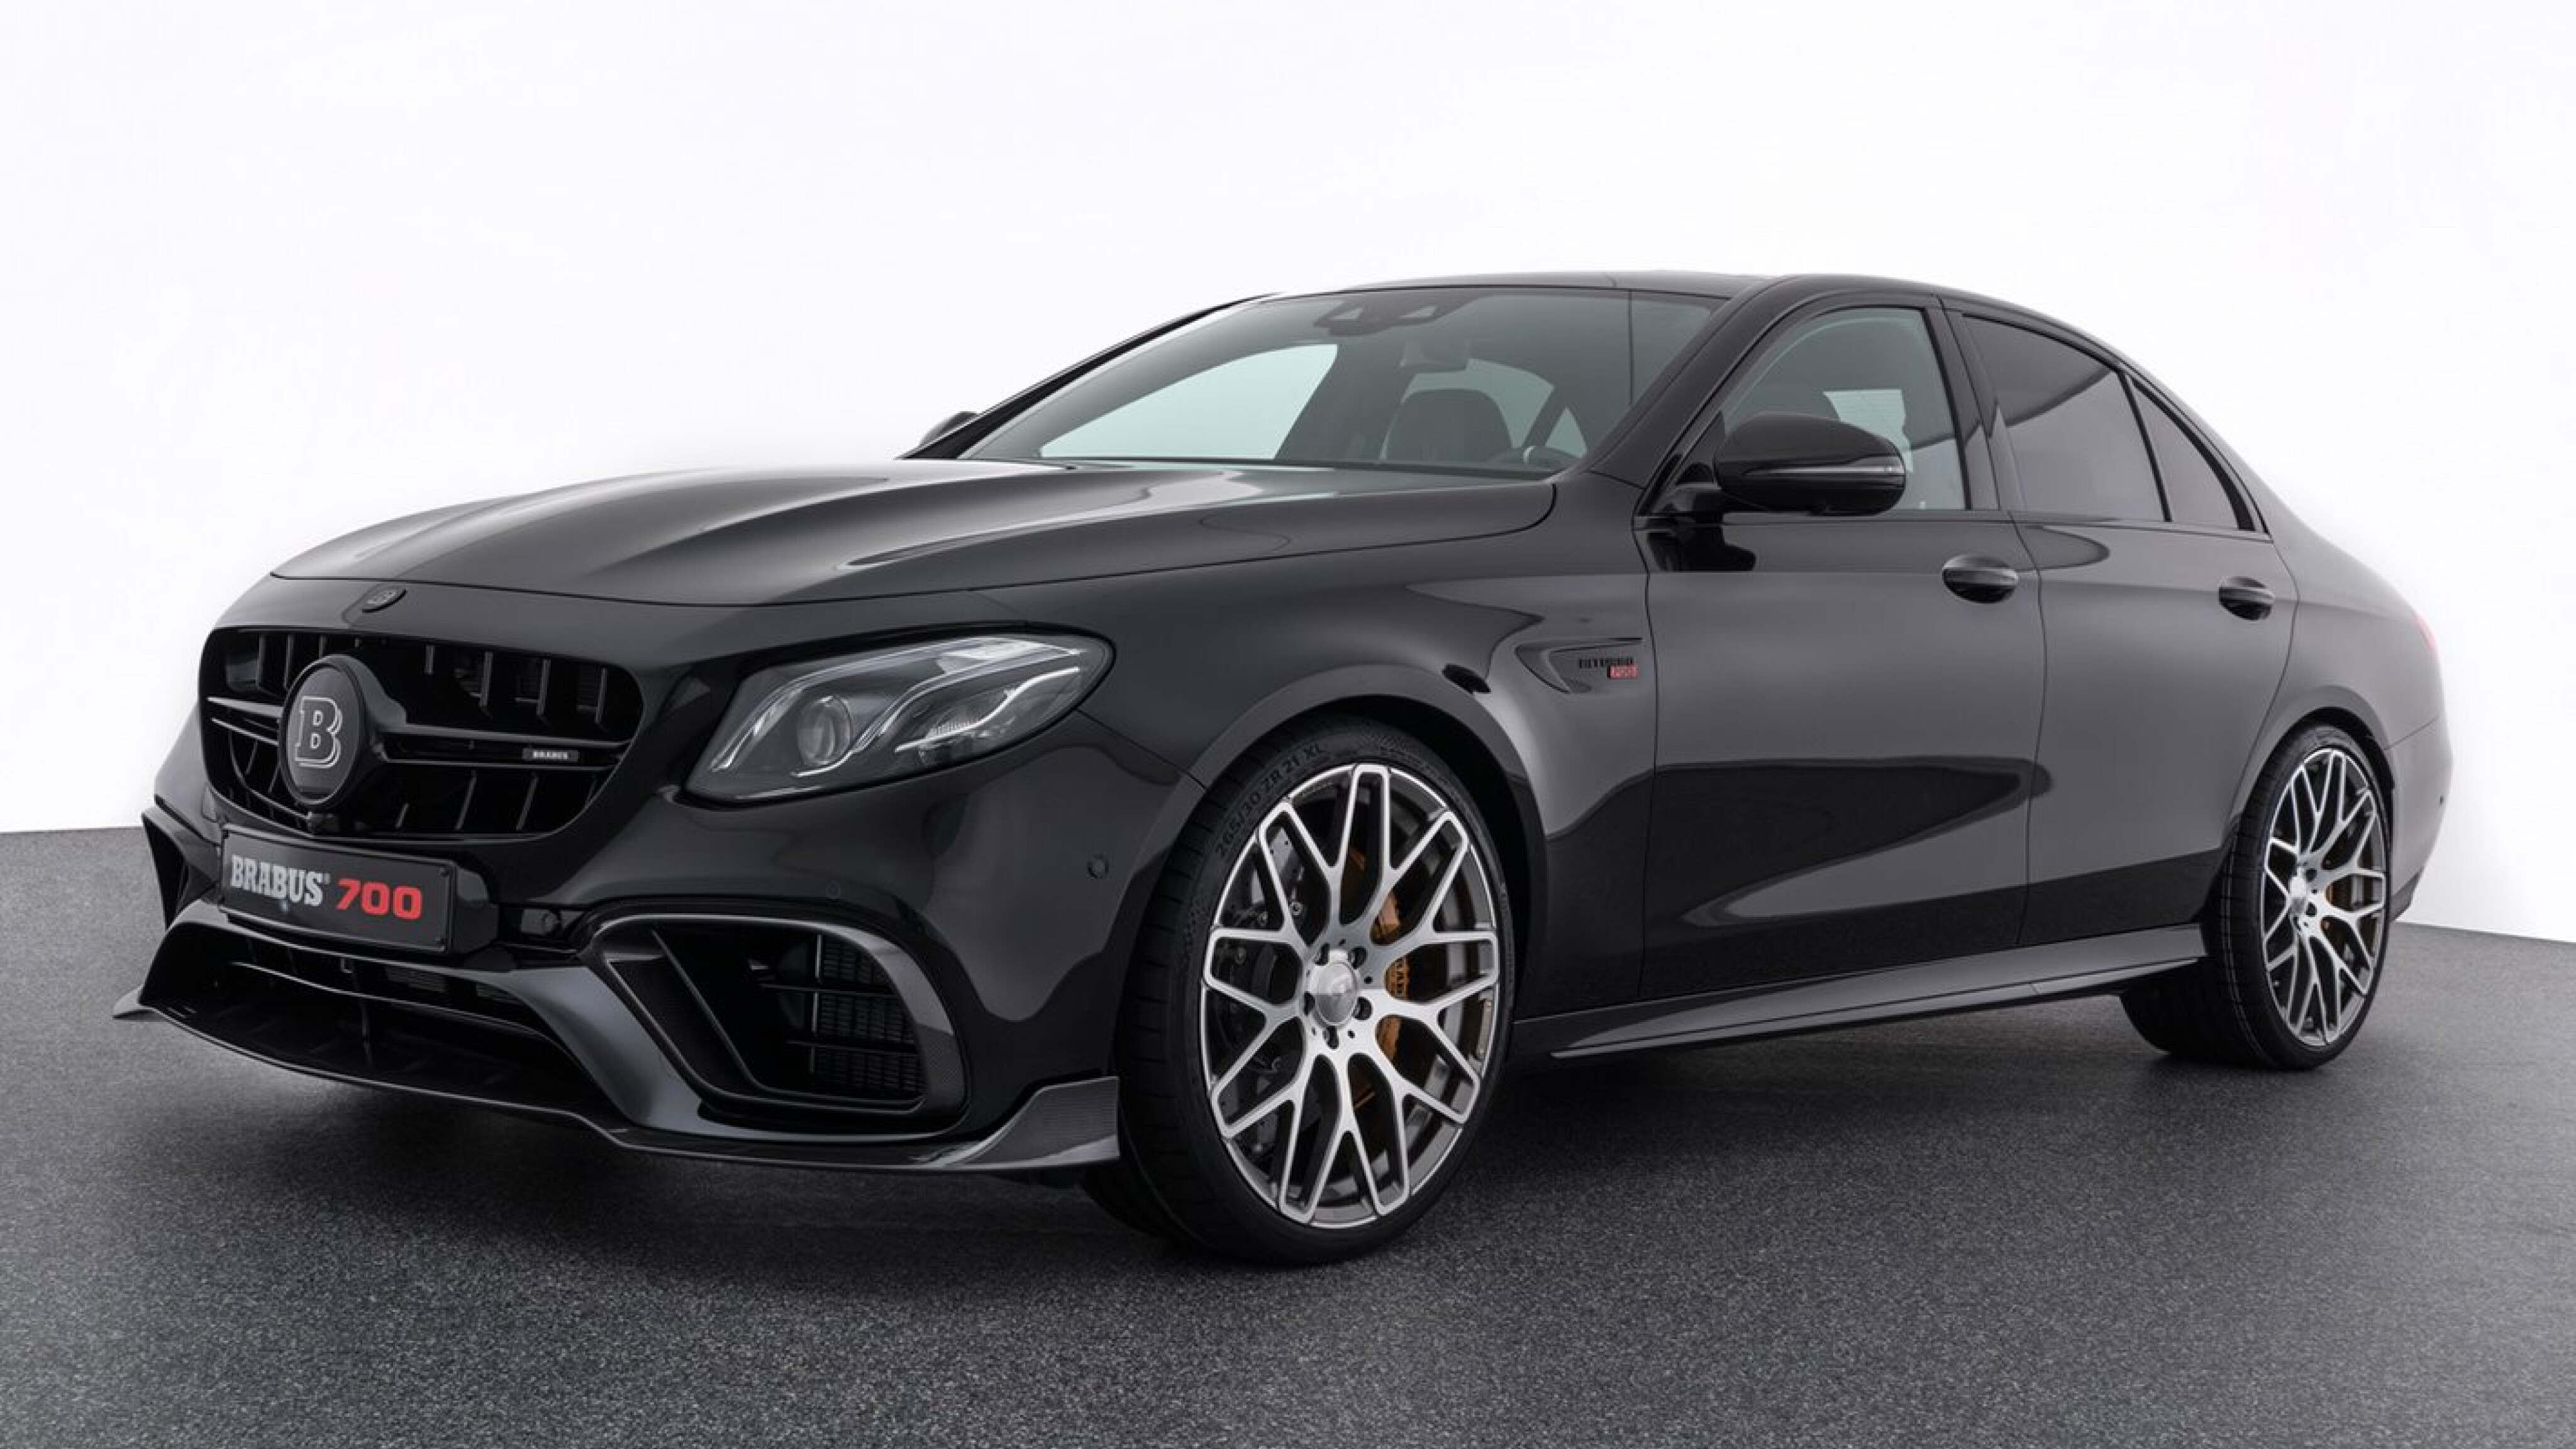 Brabus to offer a super-limited special edition based on the